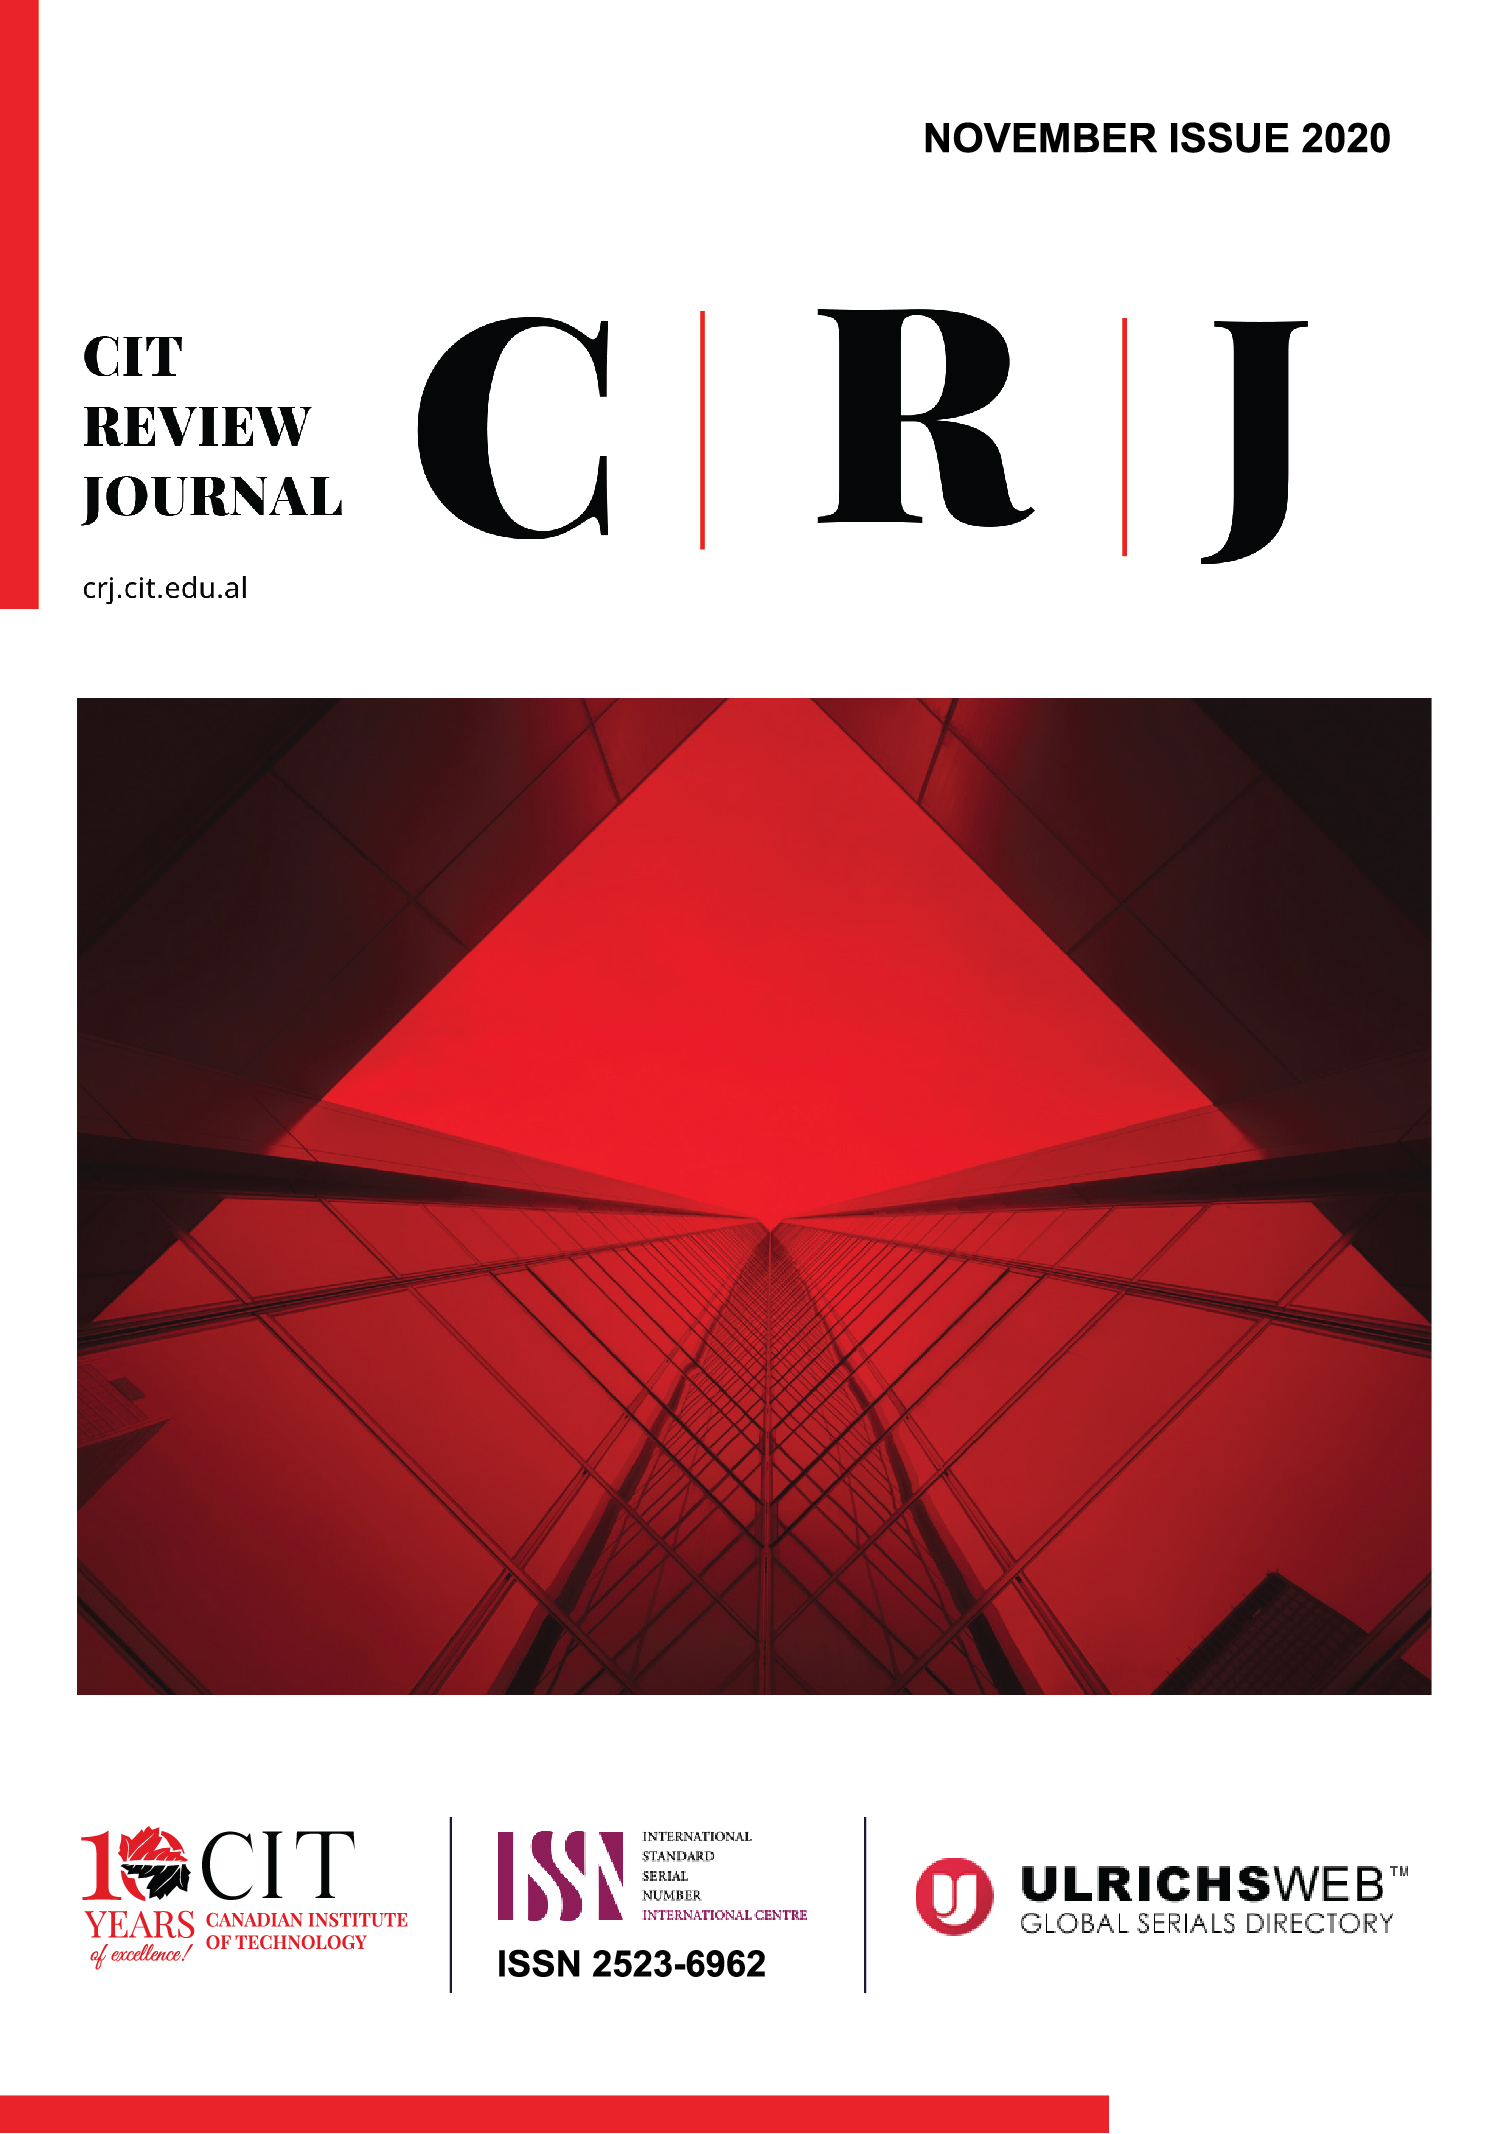 CIT Review Journal November Issue 2020